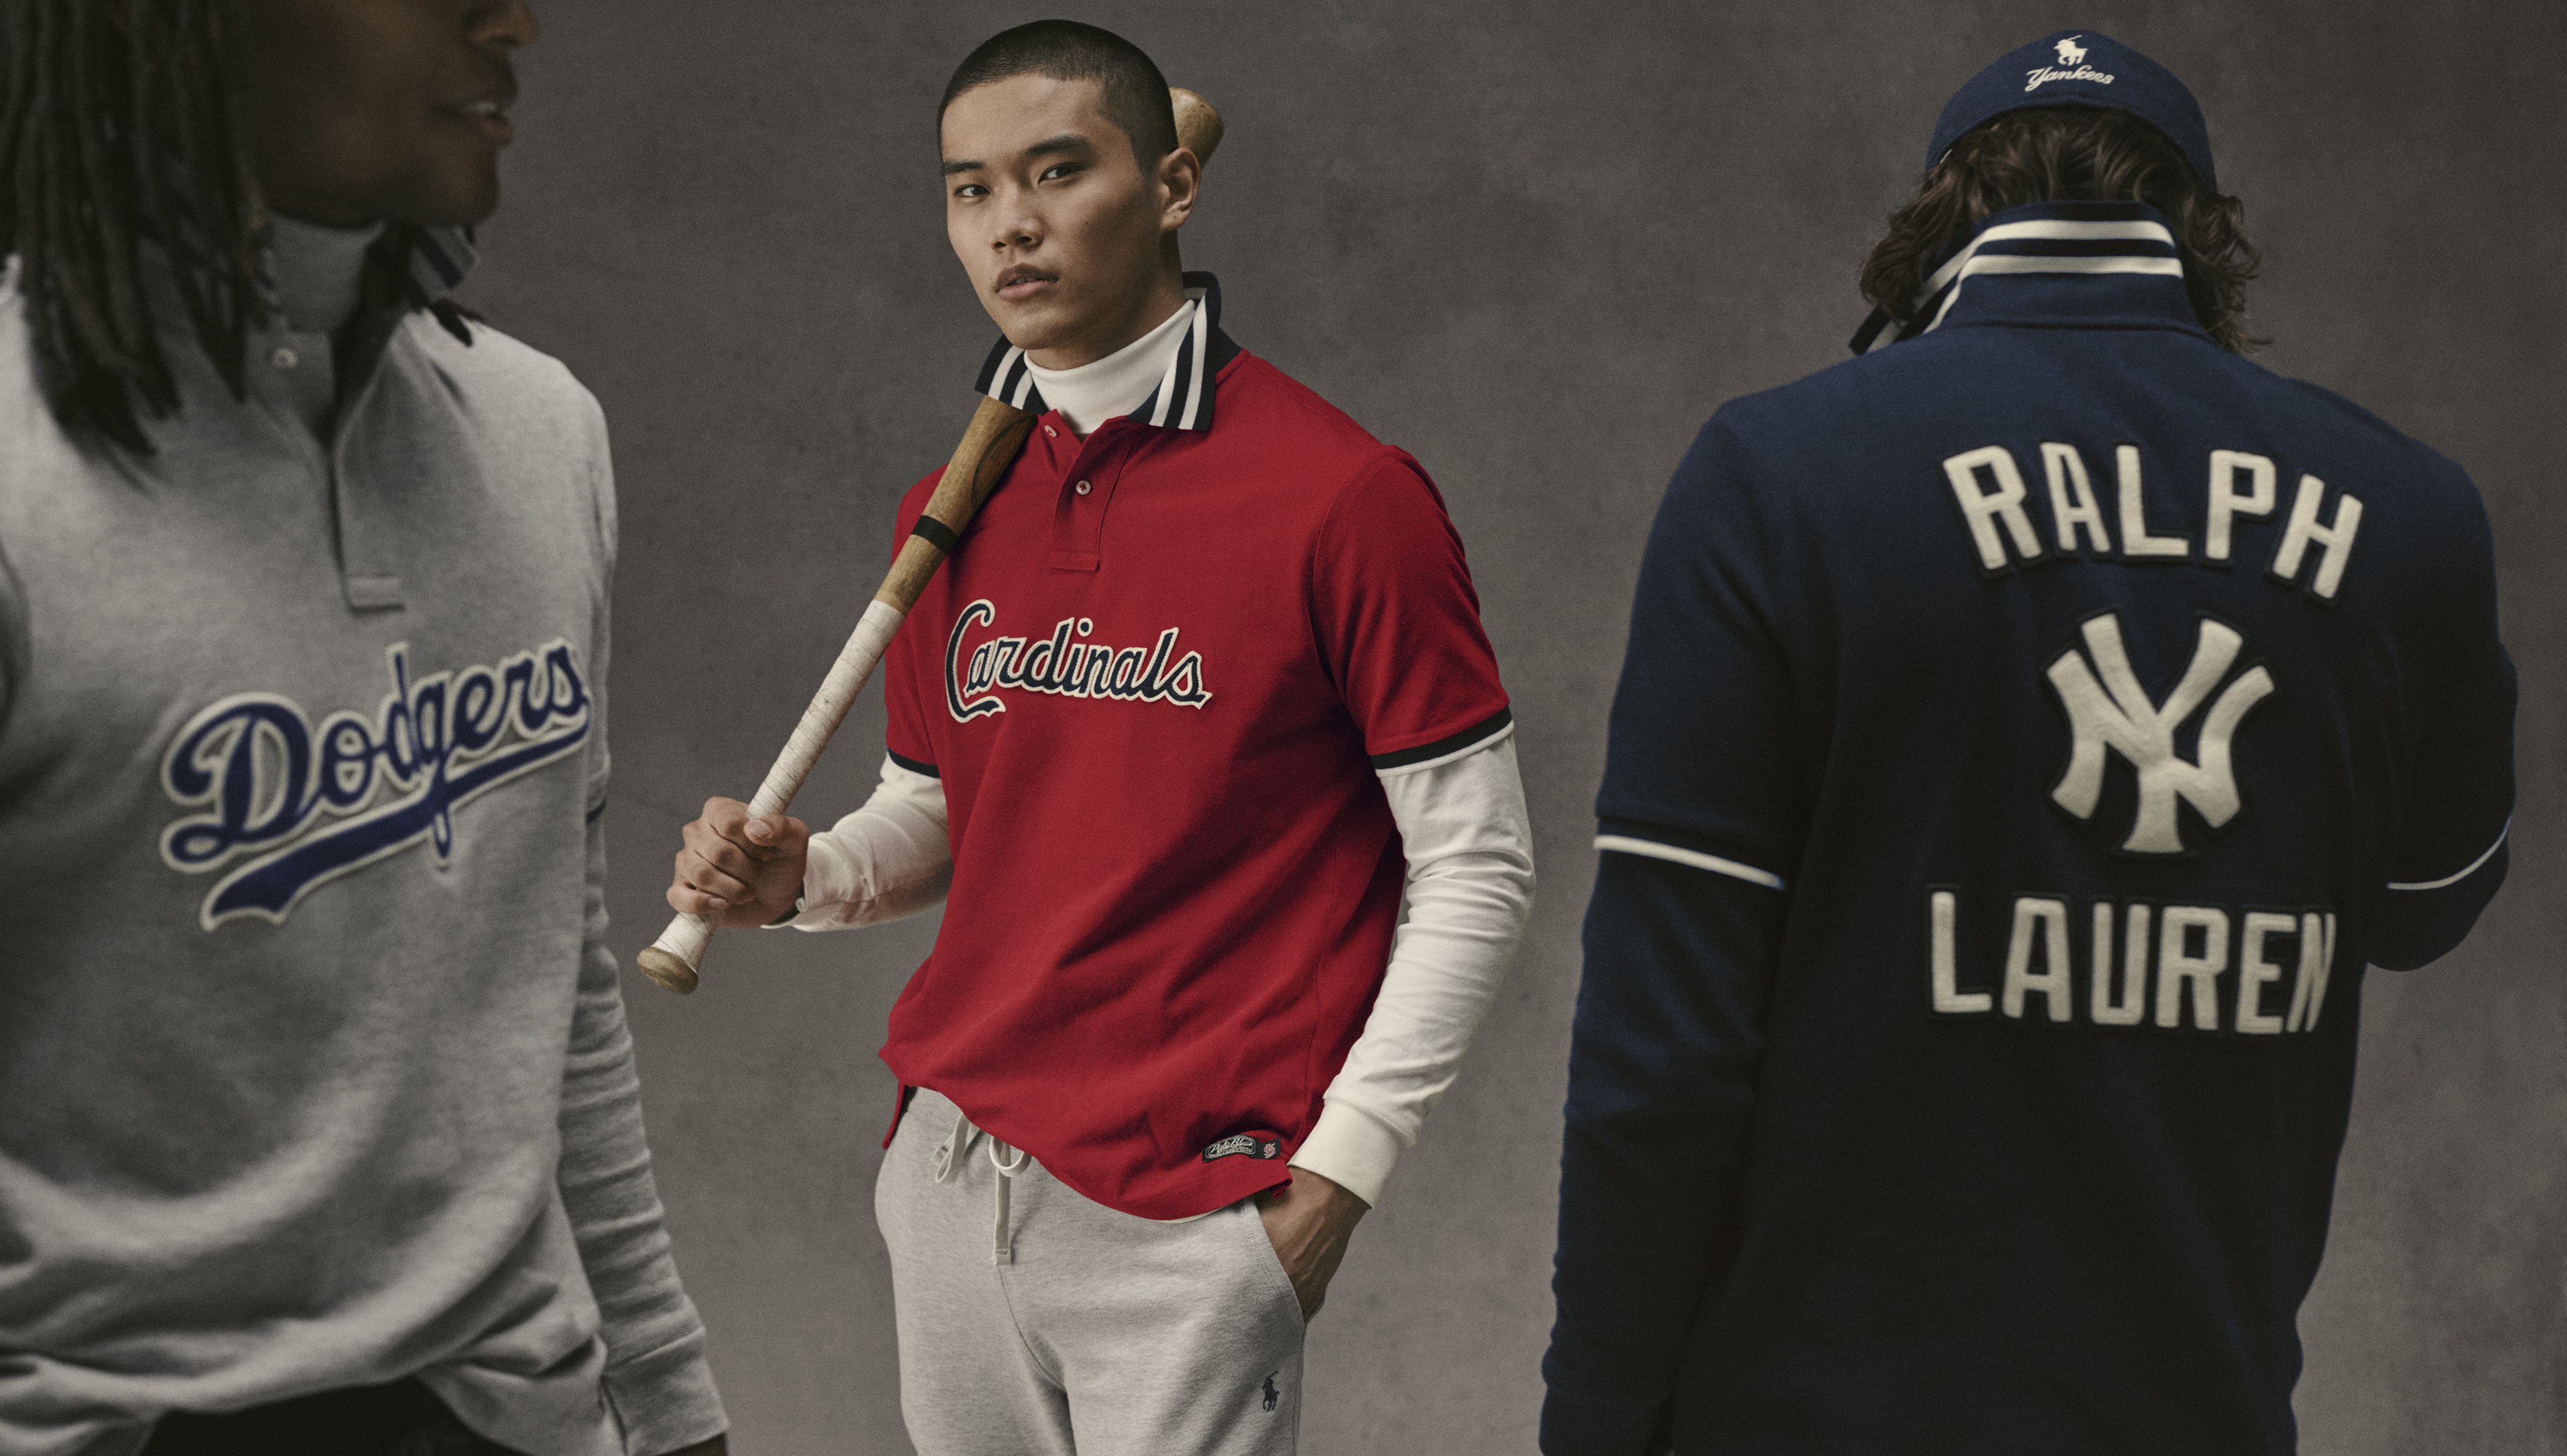 Polo Ralph Lauren Launches Campaign for New Collection Celebrating